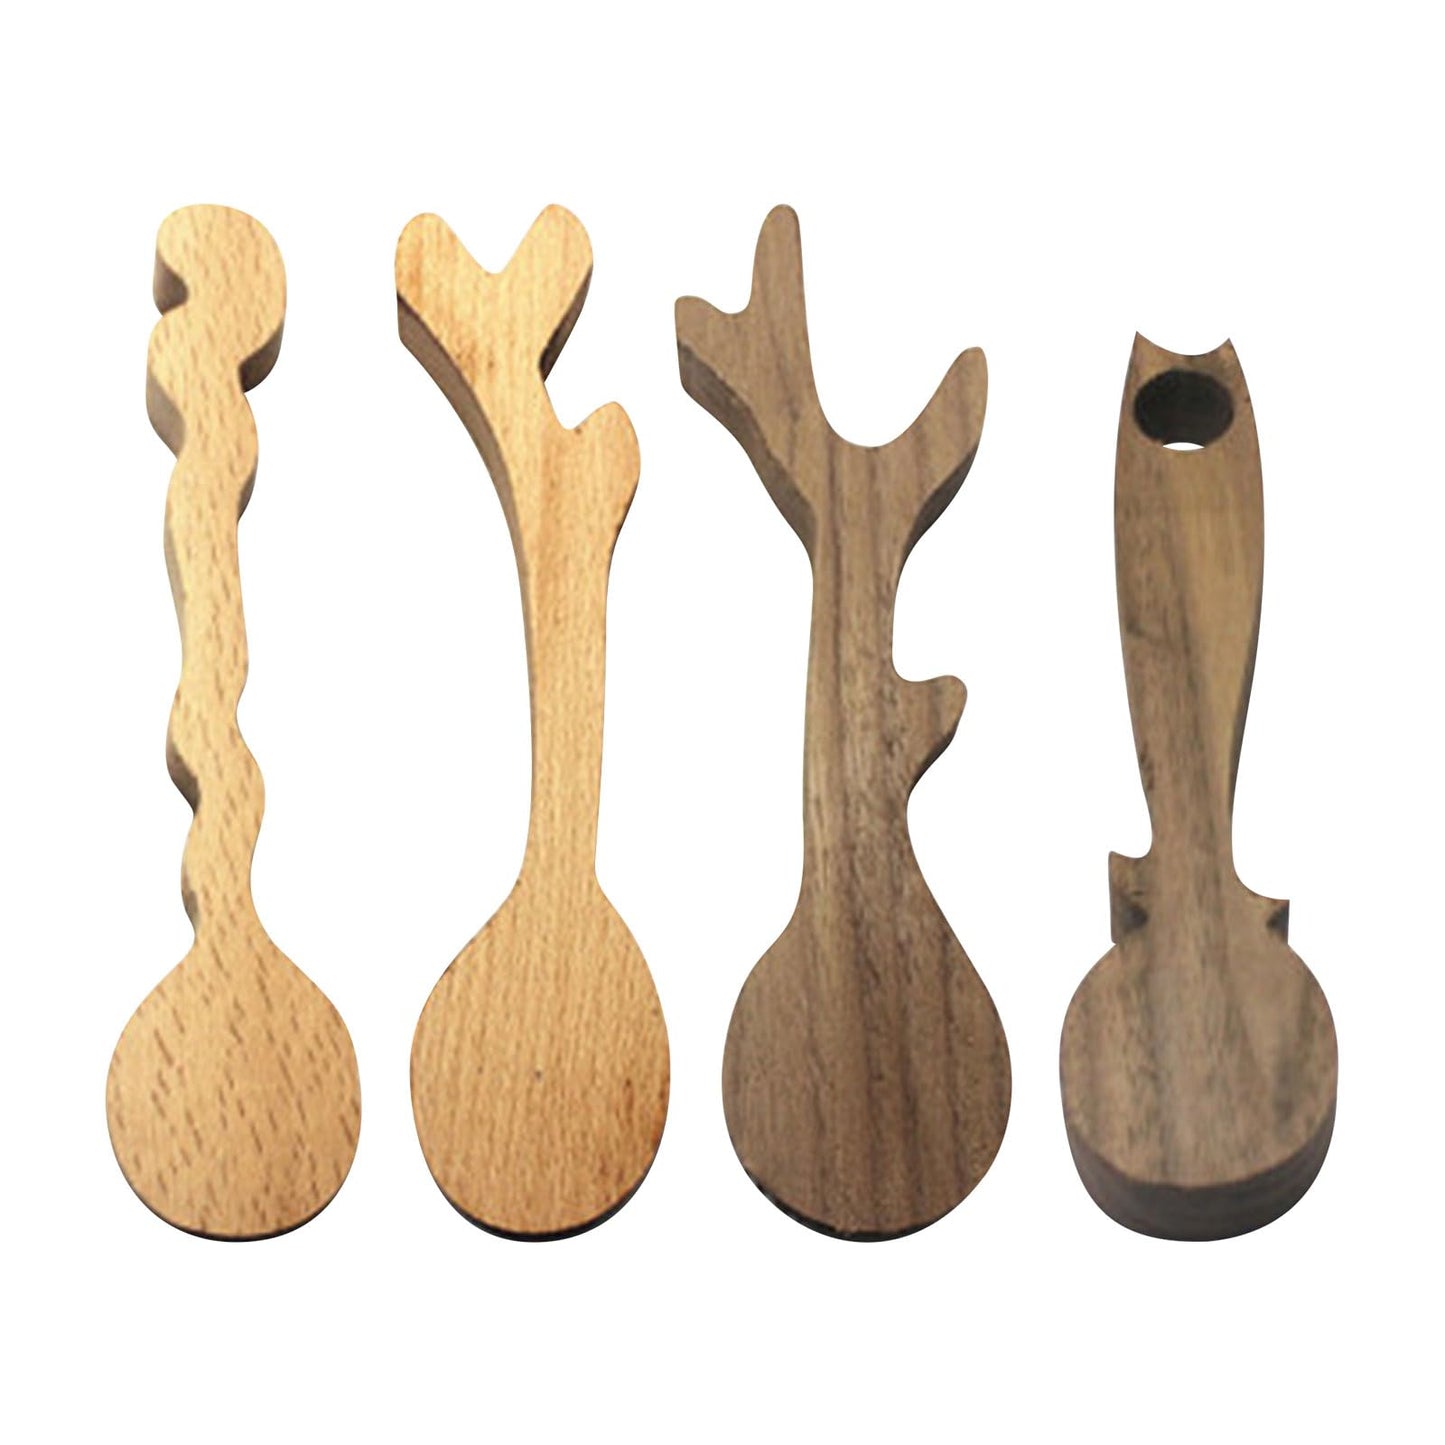 4 Pcs Spoon Carving Wood Blanks, Wood Carving Spoon Blank Unfinished,  Beechwood Black Walnut Blanks Carving Wood for Whittling Spoon, 4 Cute  Shapes